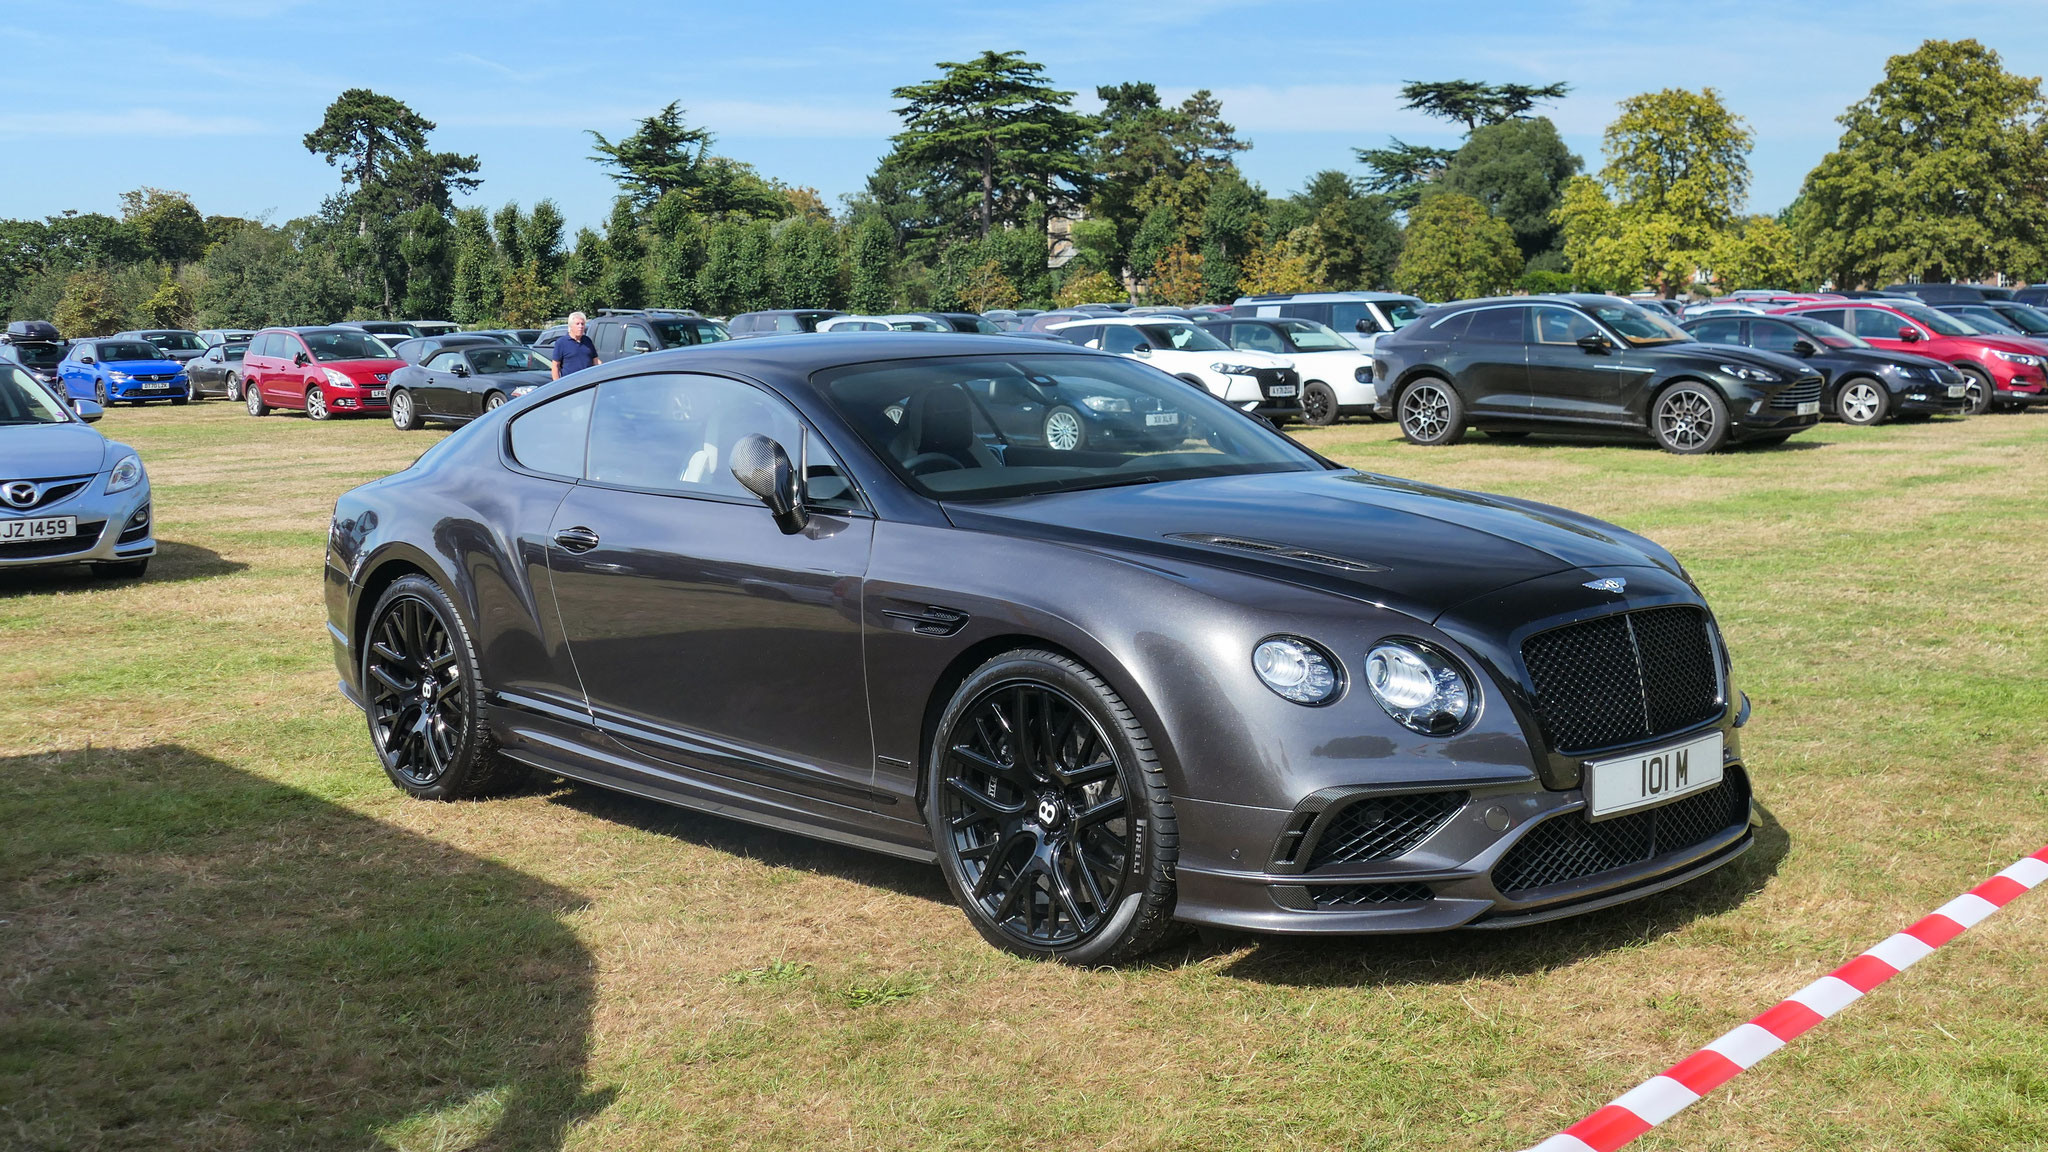 Bentley Continental GT Supersports - I01M (GB)